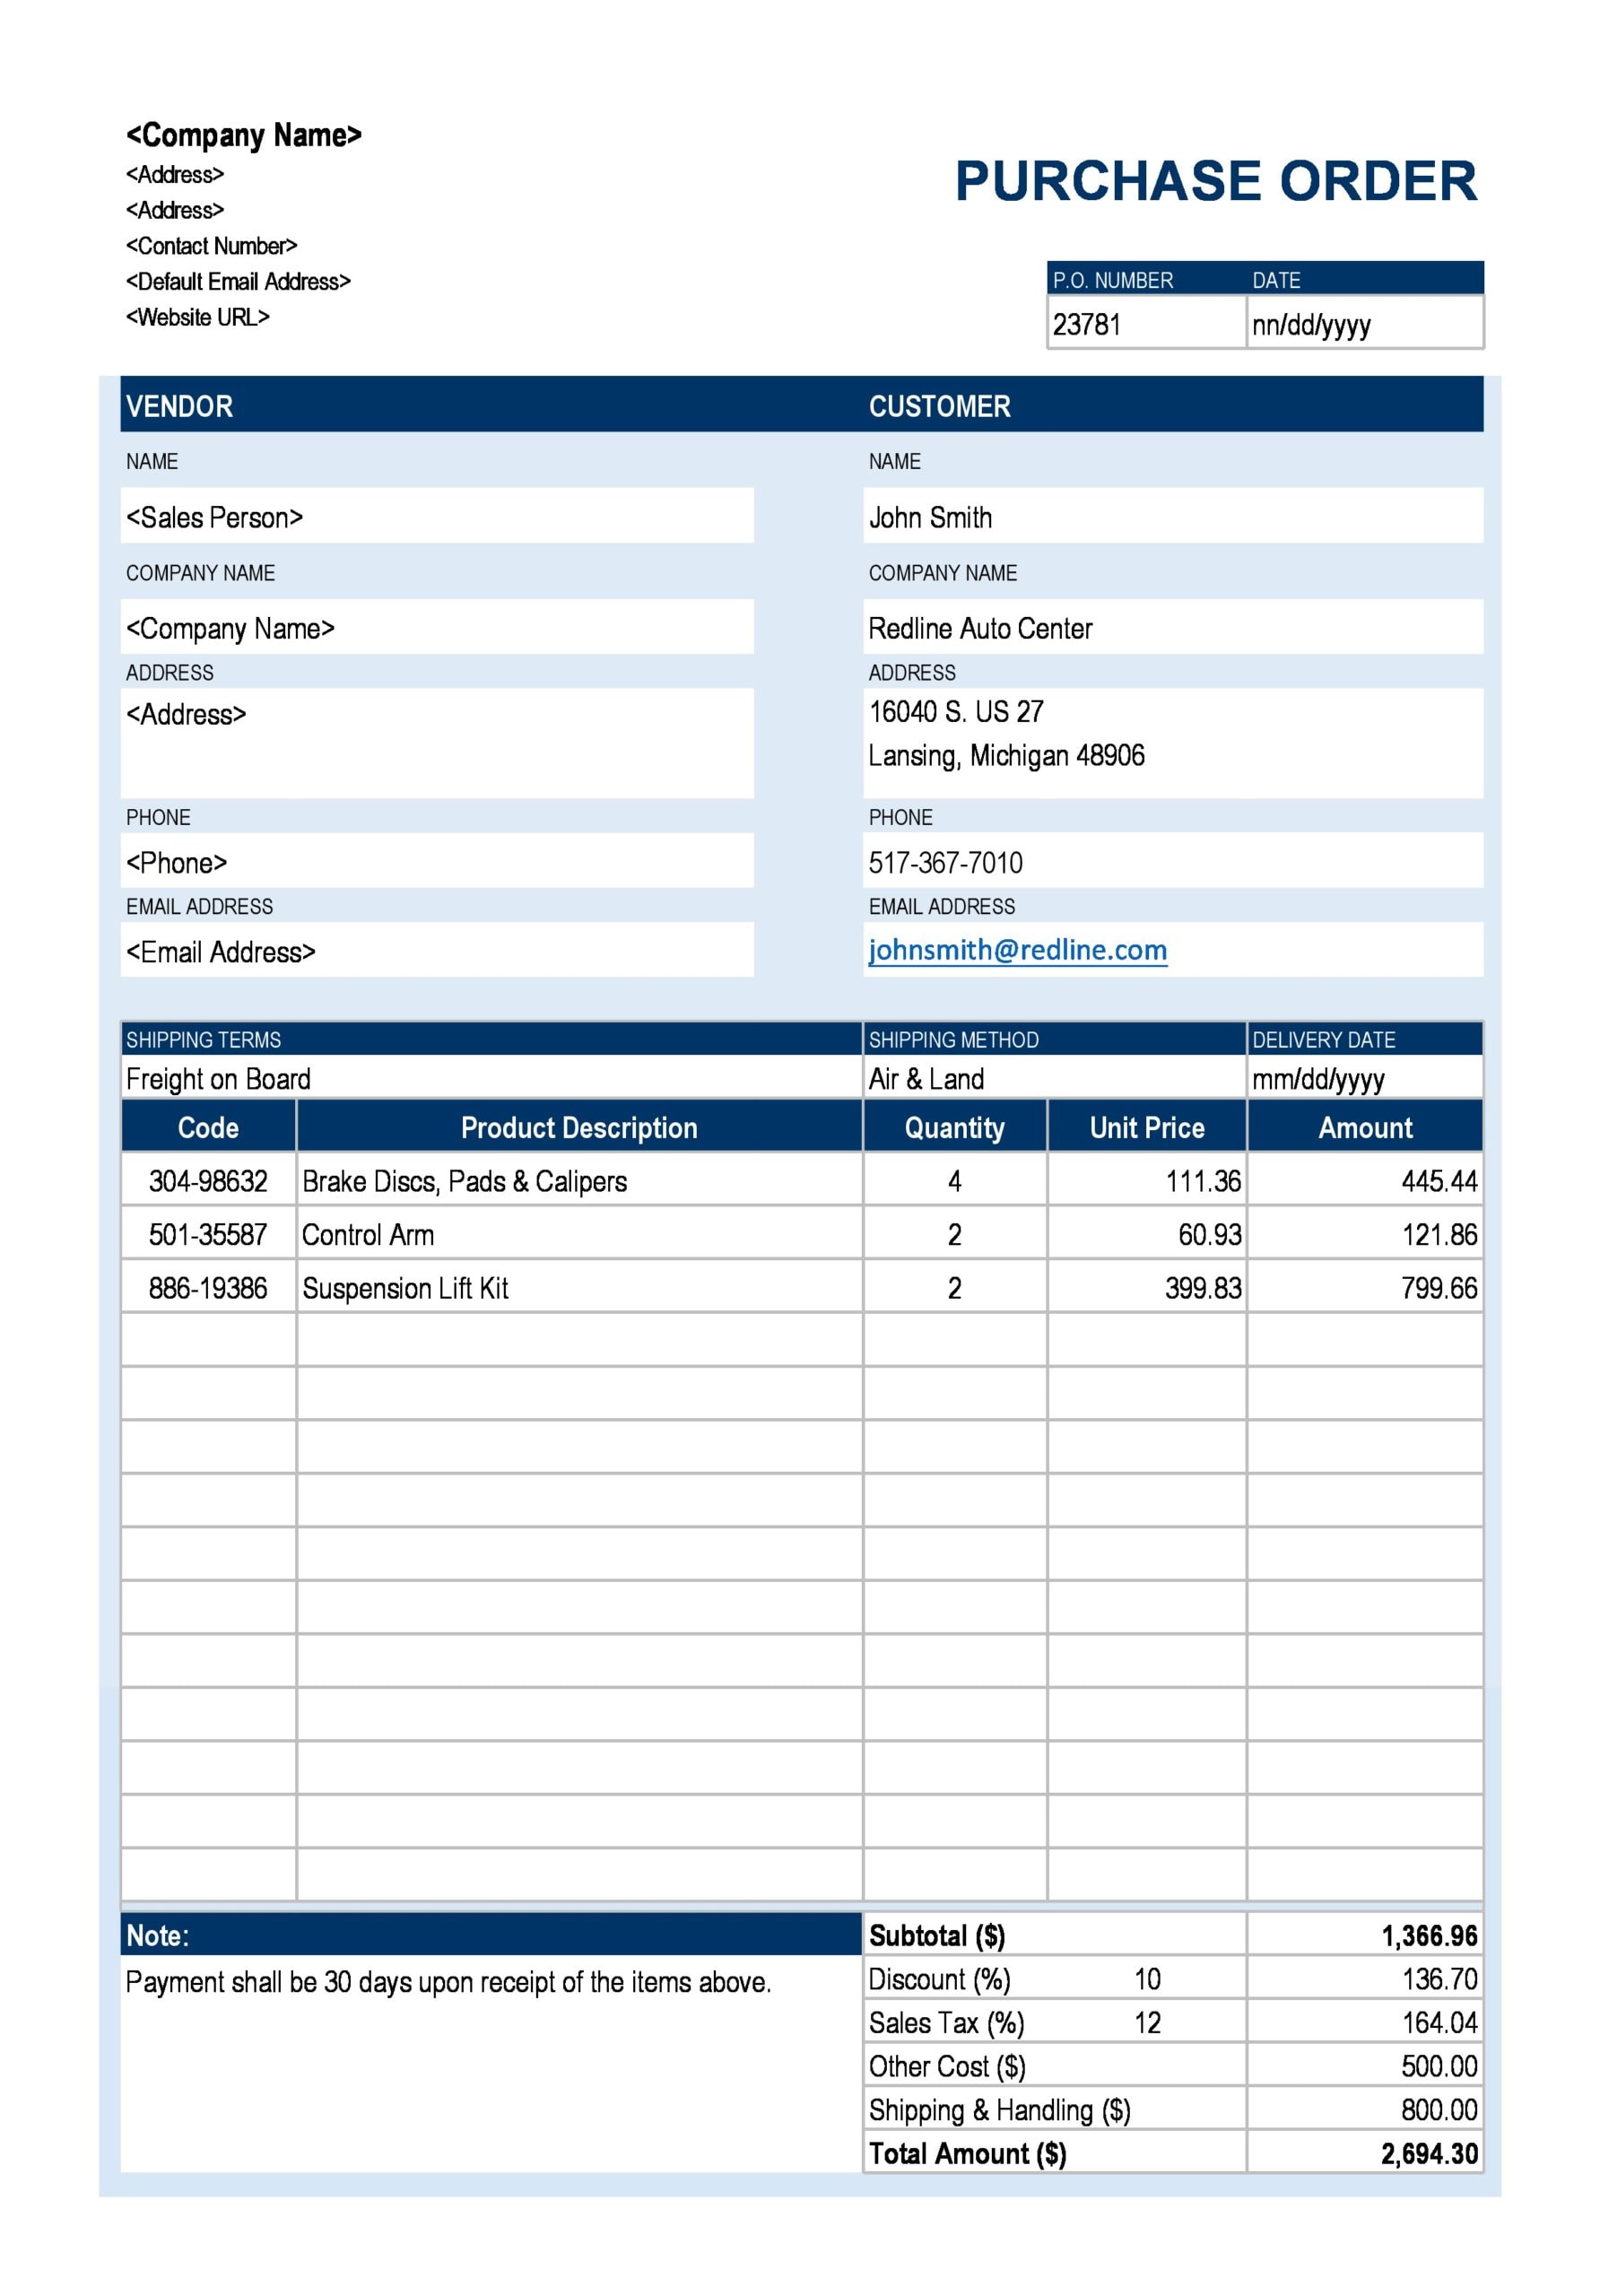 30 Free Purchase Order Templates (Excel & Doc) - TemplateArchive